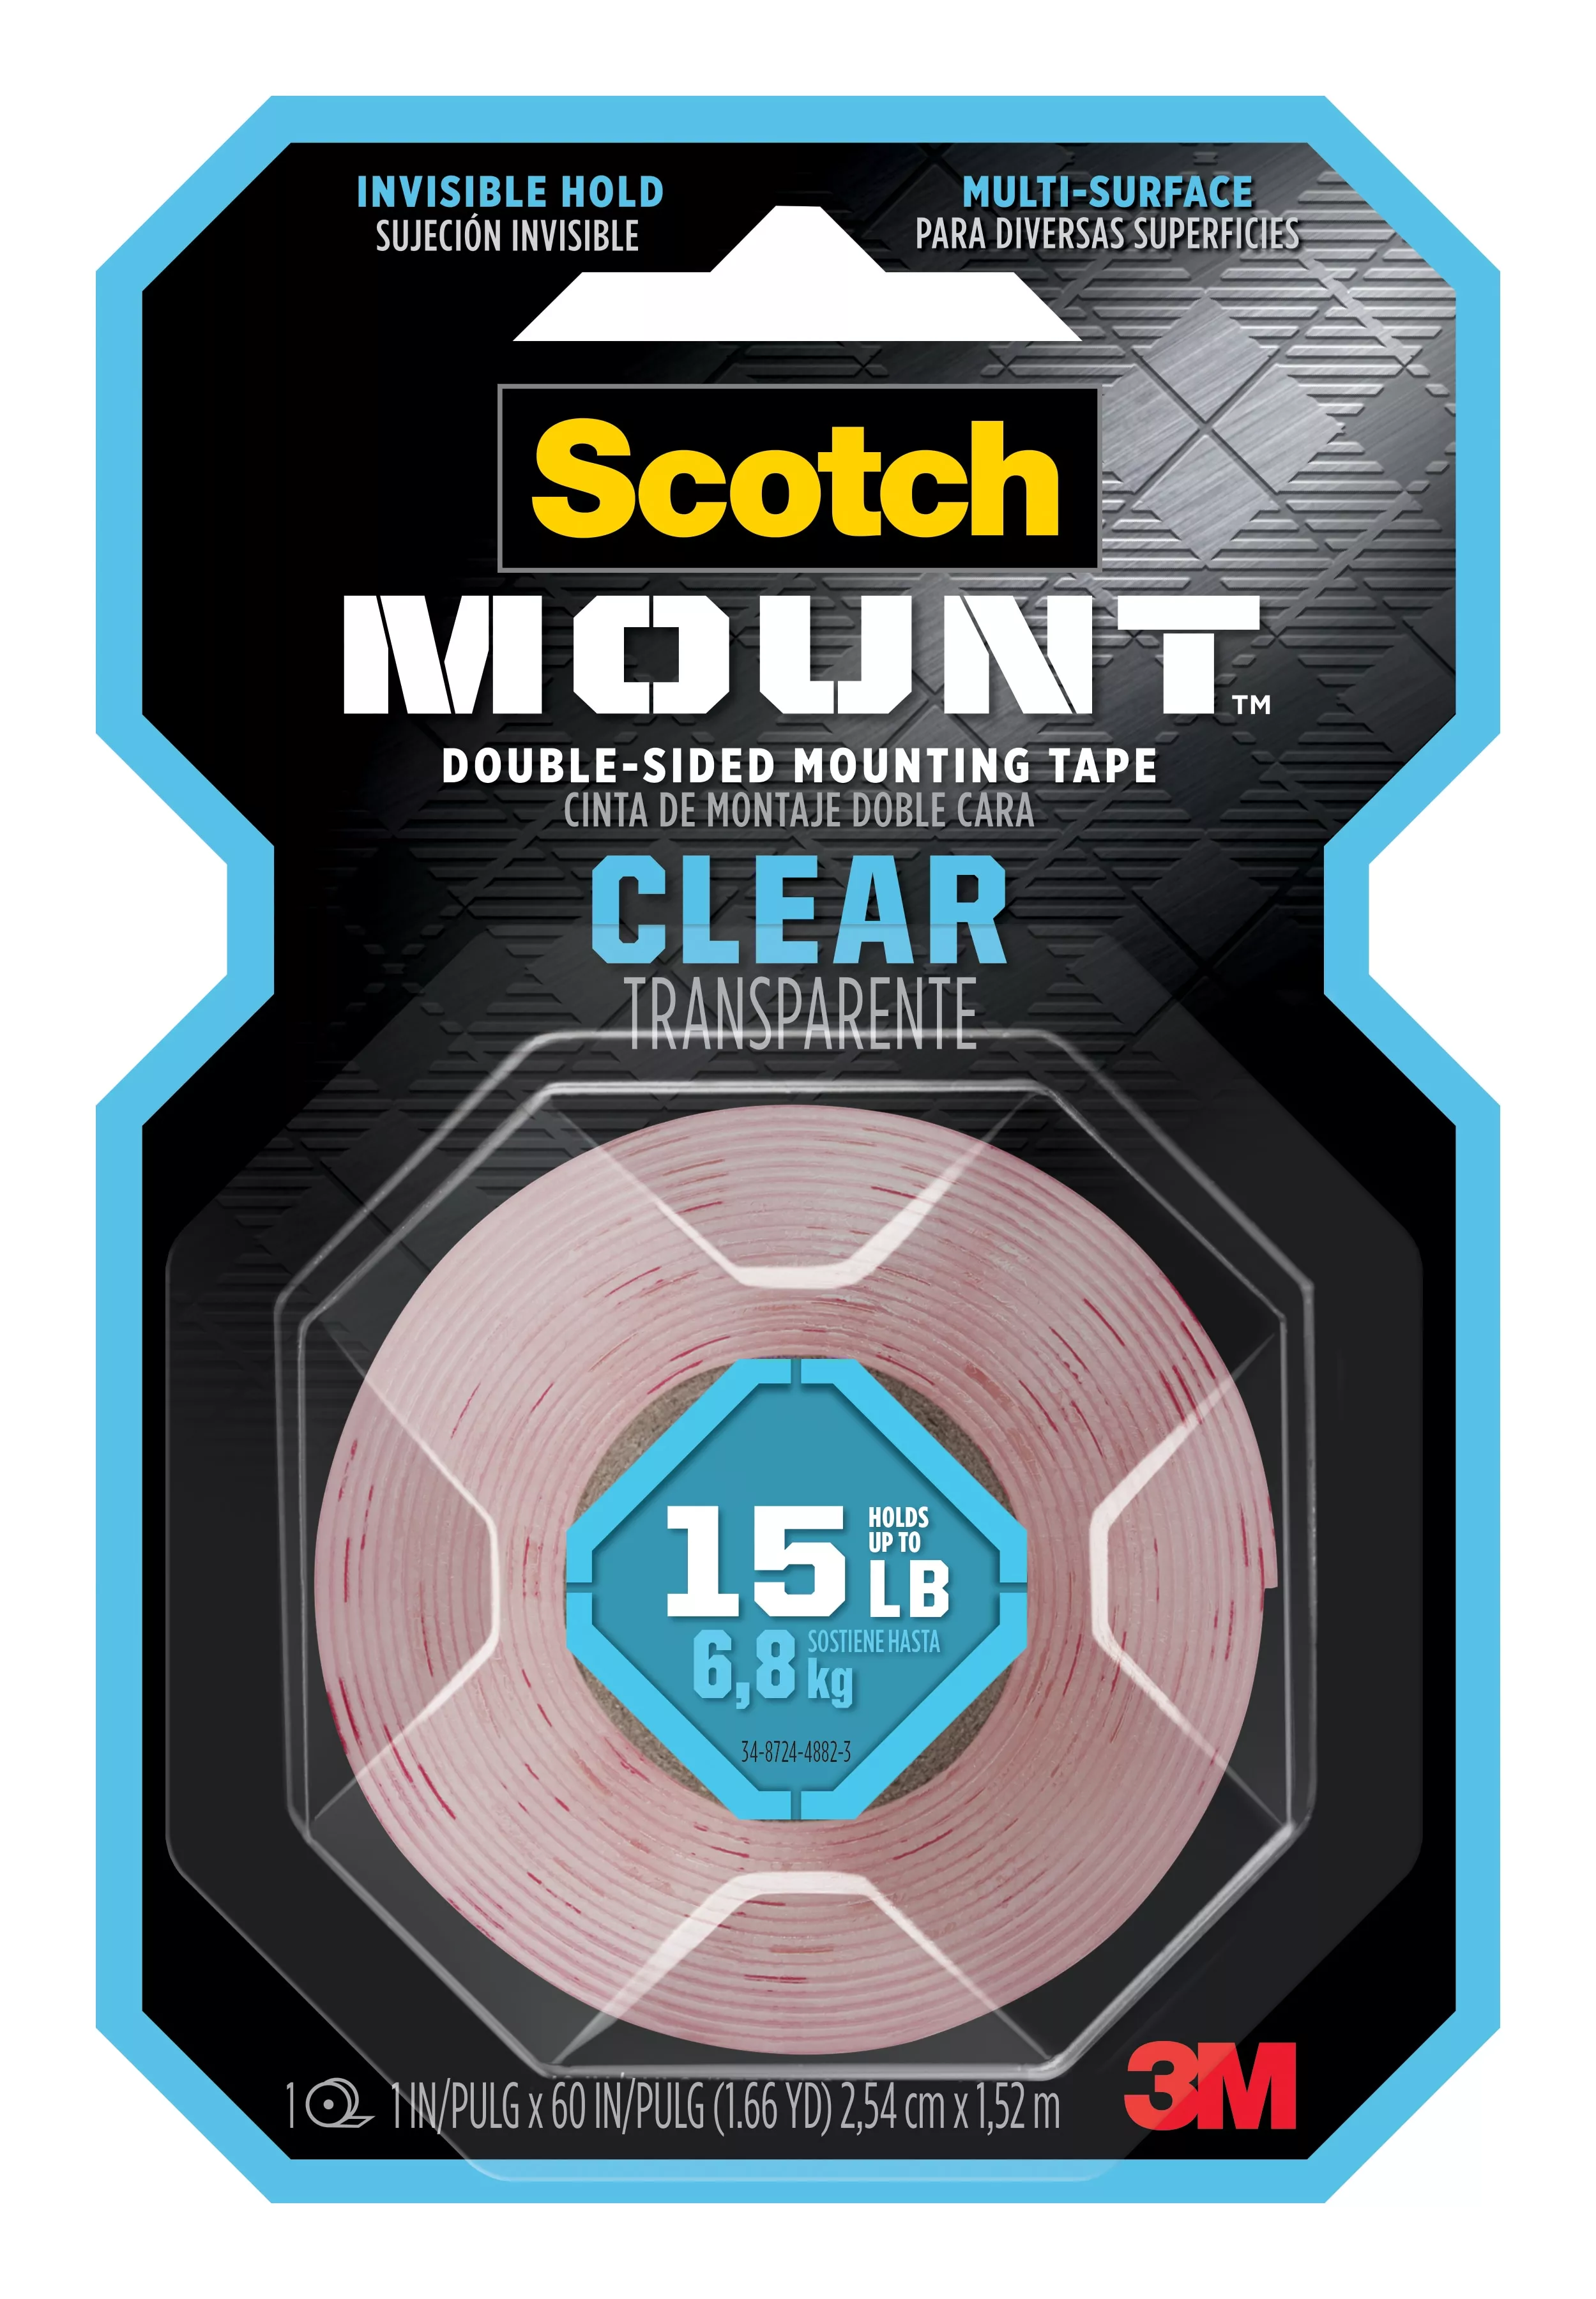 Scotch-Mount™ Clear Double-Sided Mounting Tape 410H, 1 in x 60 in (2.54 cm x 1.52 m)